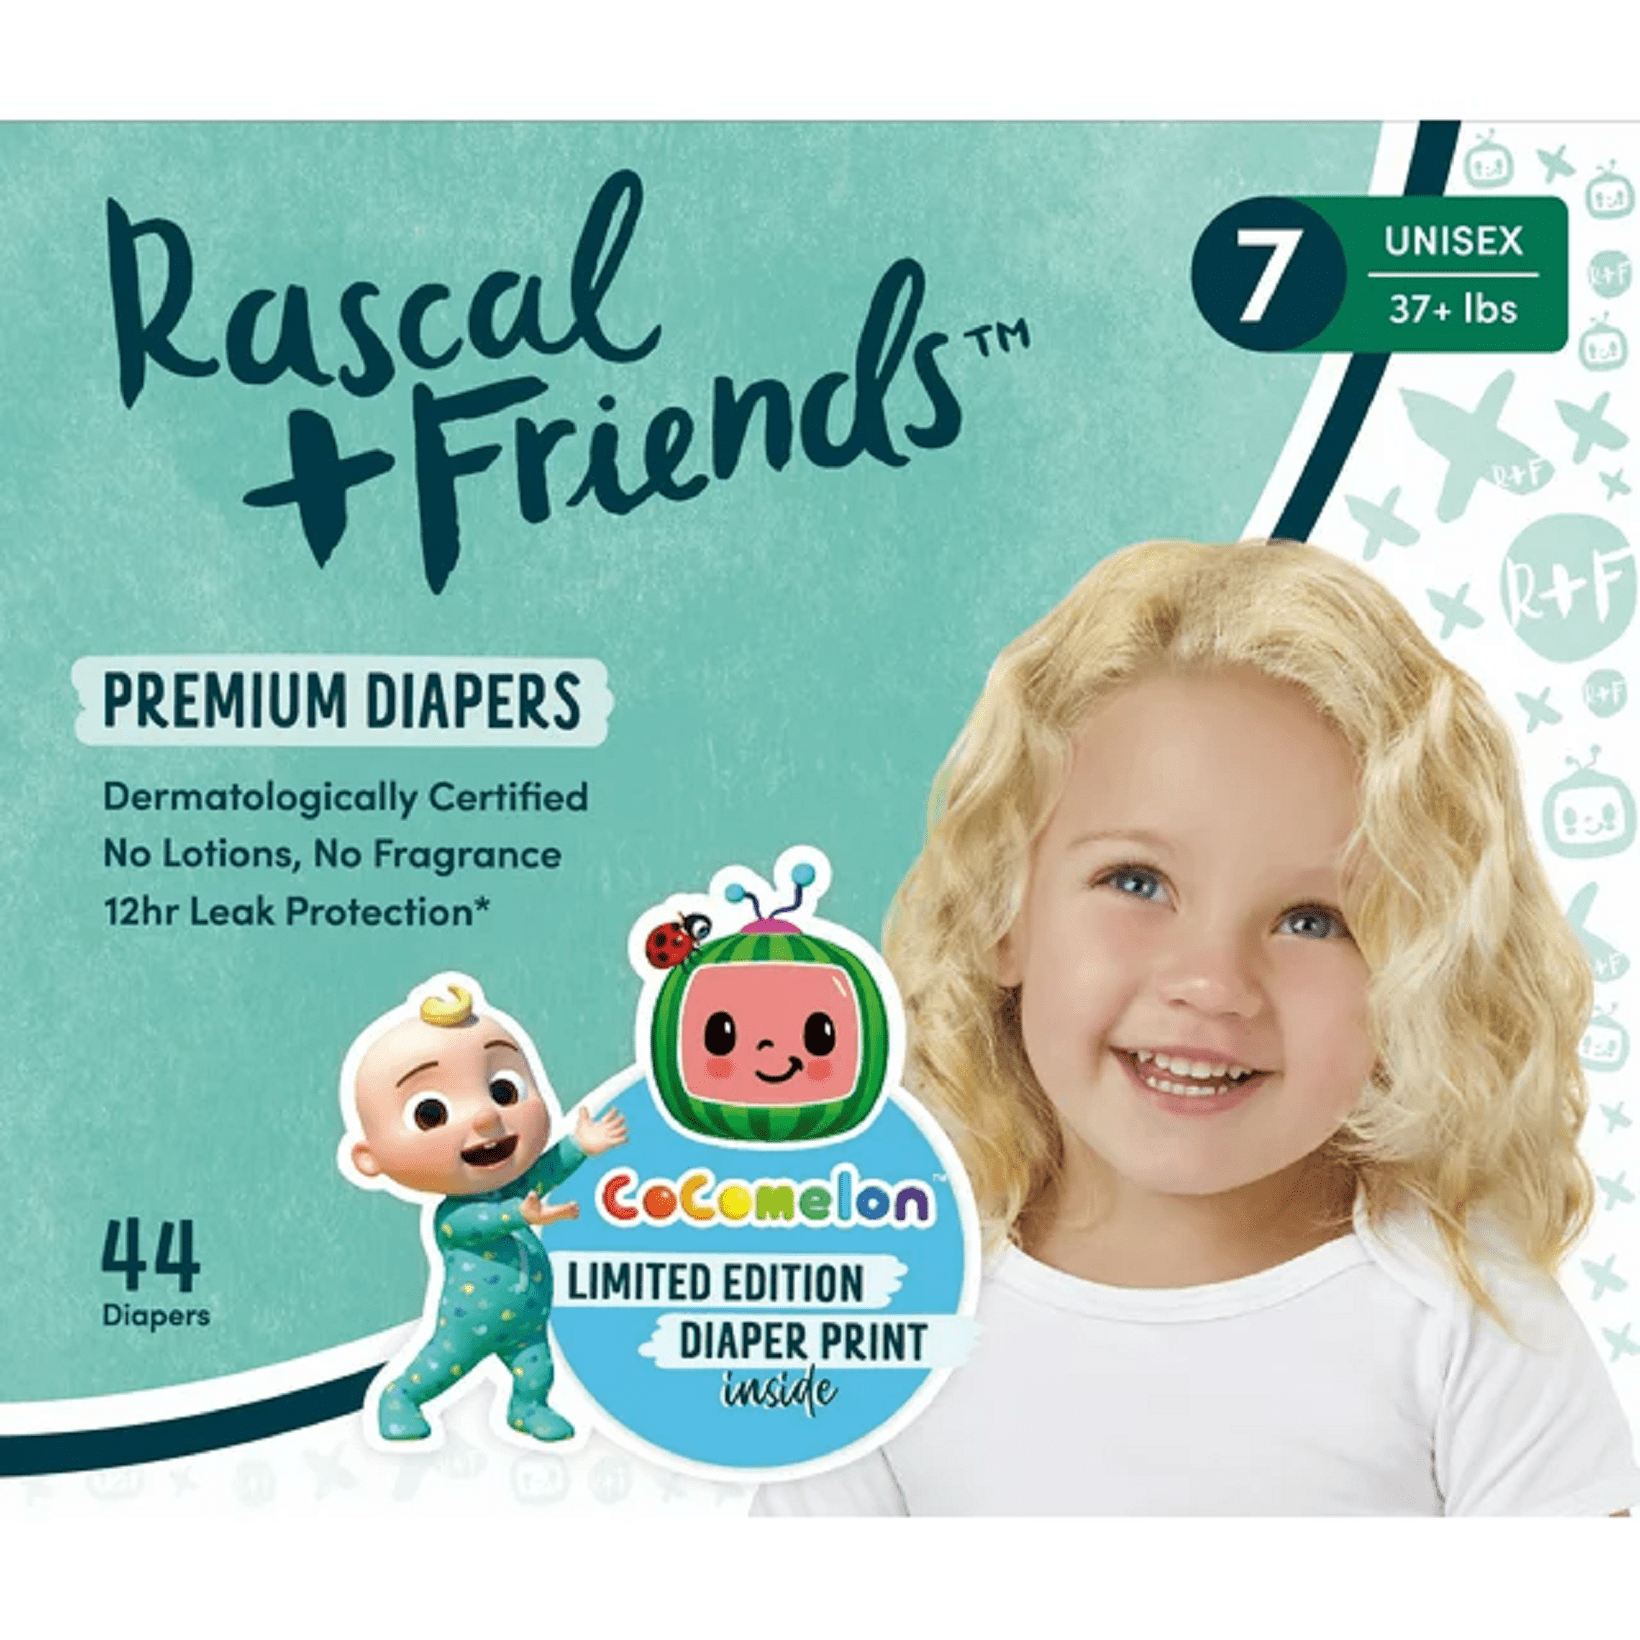 Rascal + Friends Diapers Cocomelon Edition Size 7, 44 Count